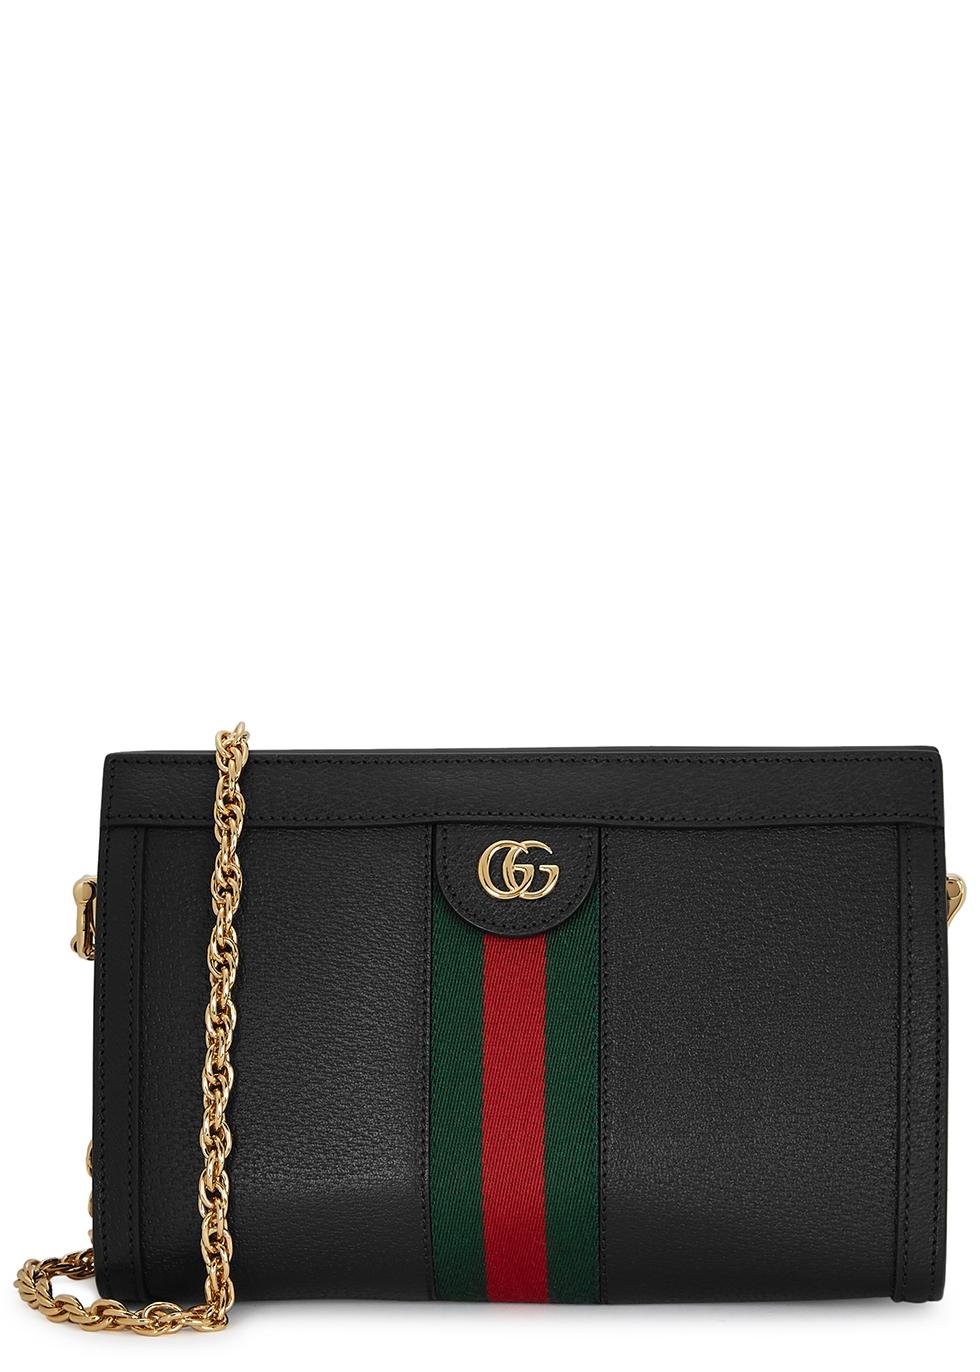 Ophidia patent leather crossbody bag Gucci Brown in Patent leather